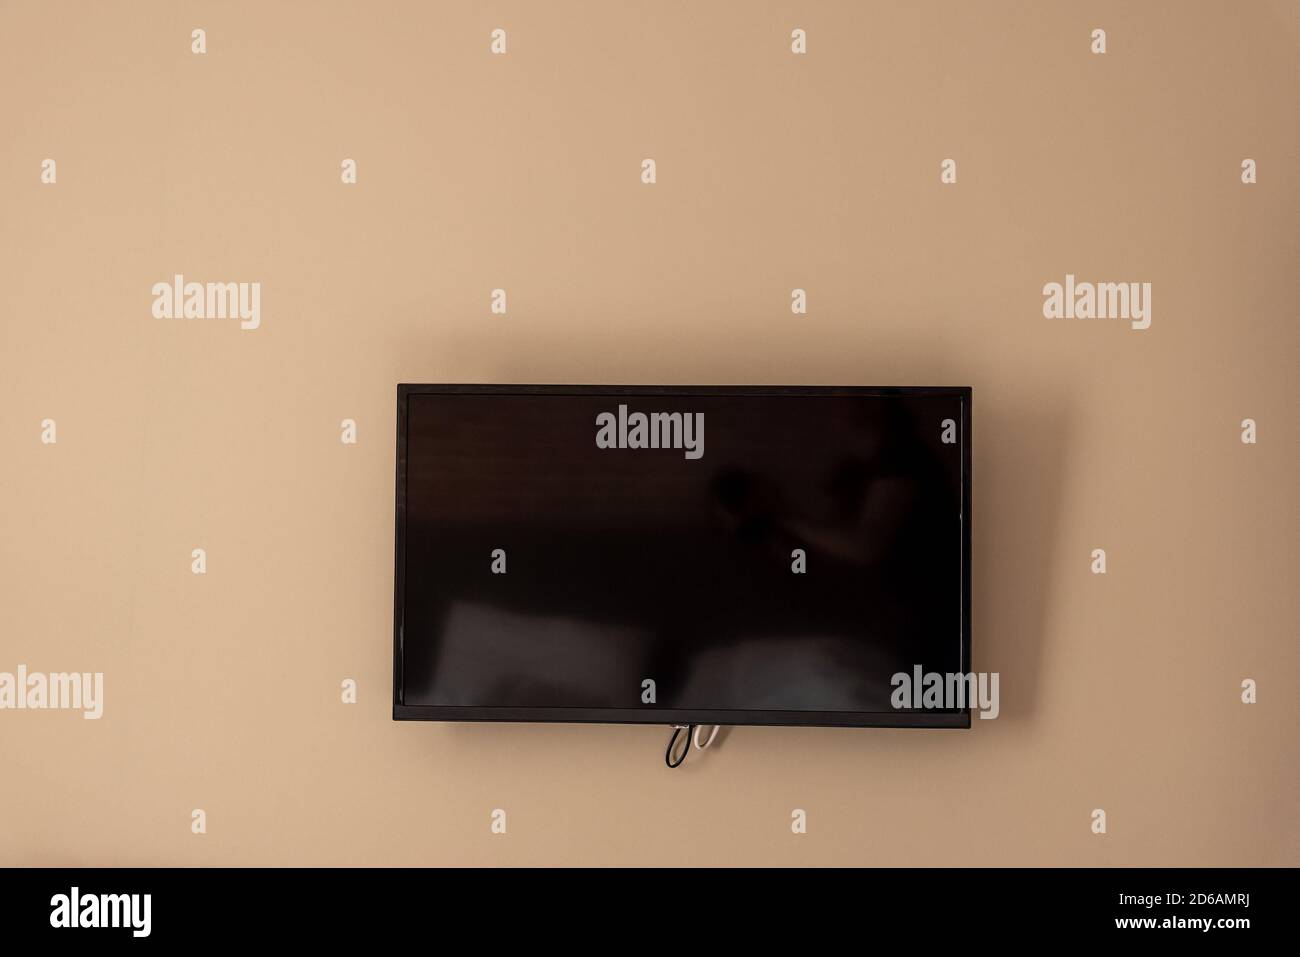 Big TV screen on beige wall, home cinema system Stock Photo